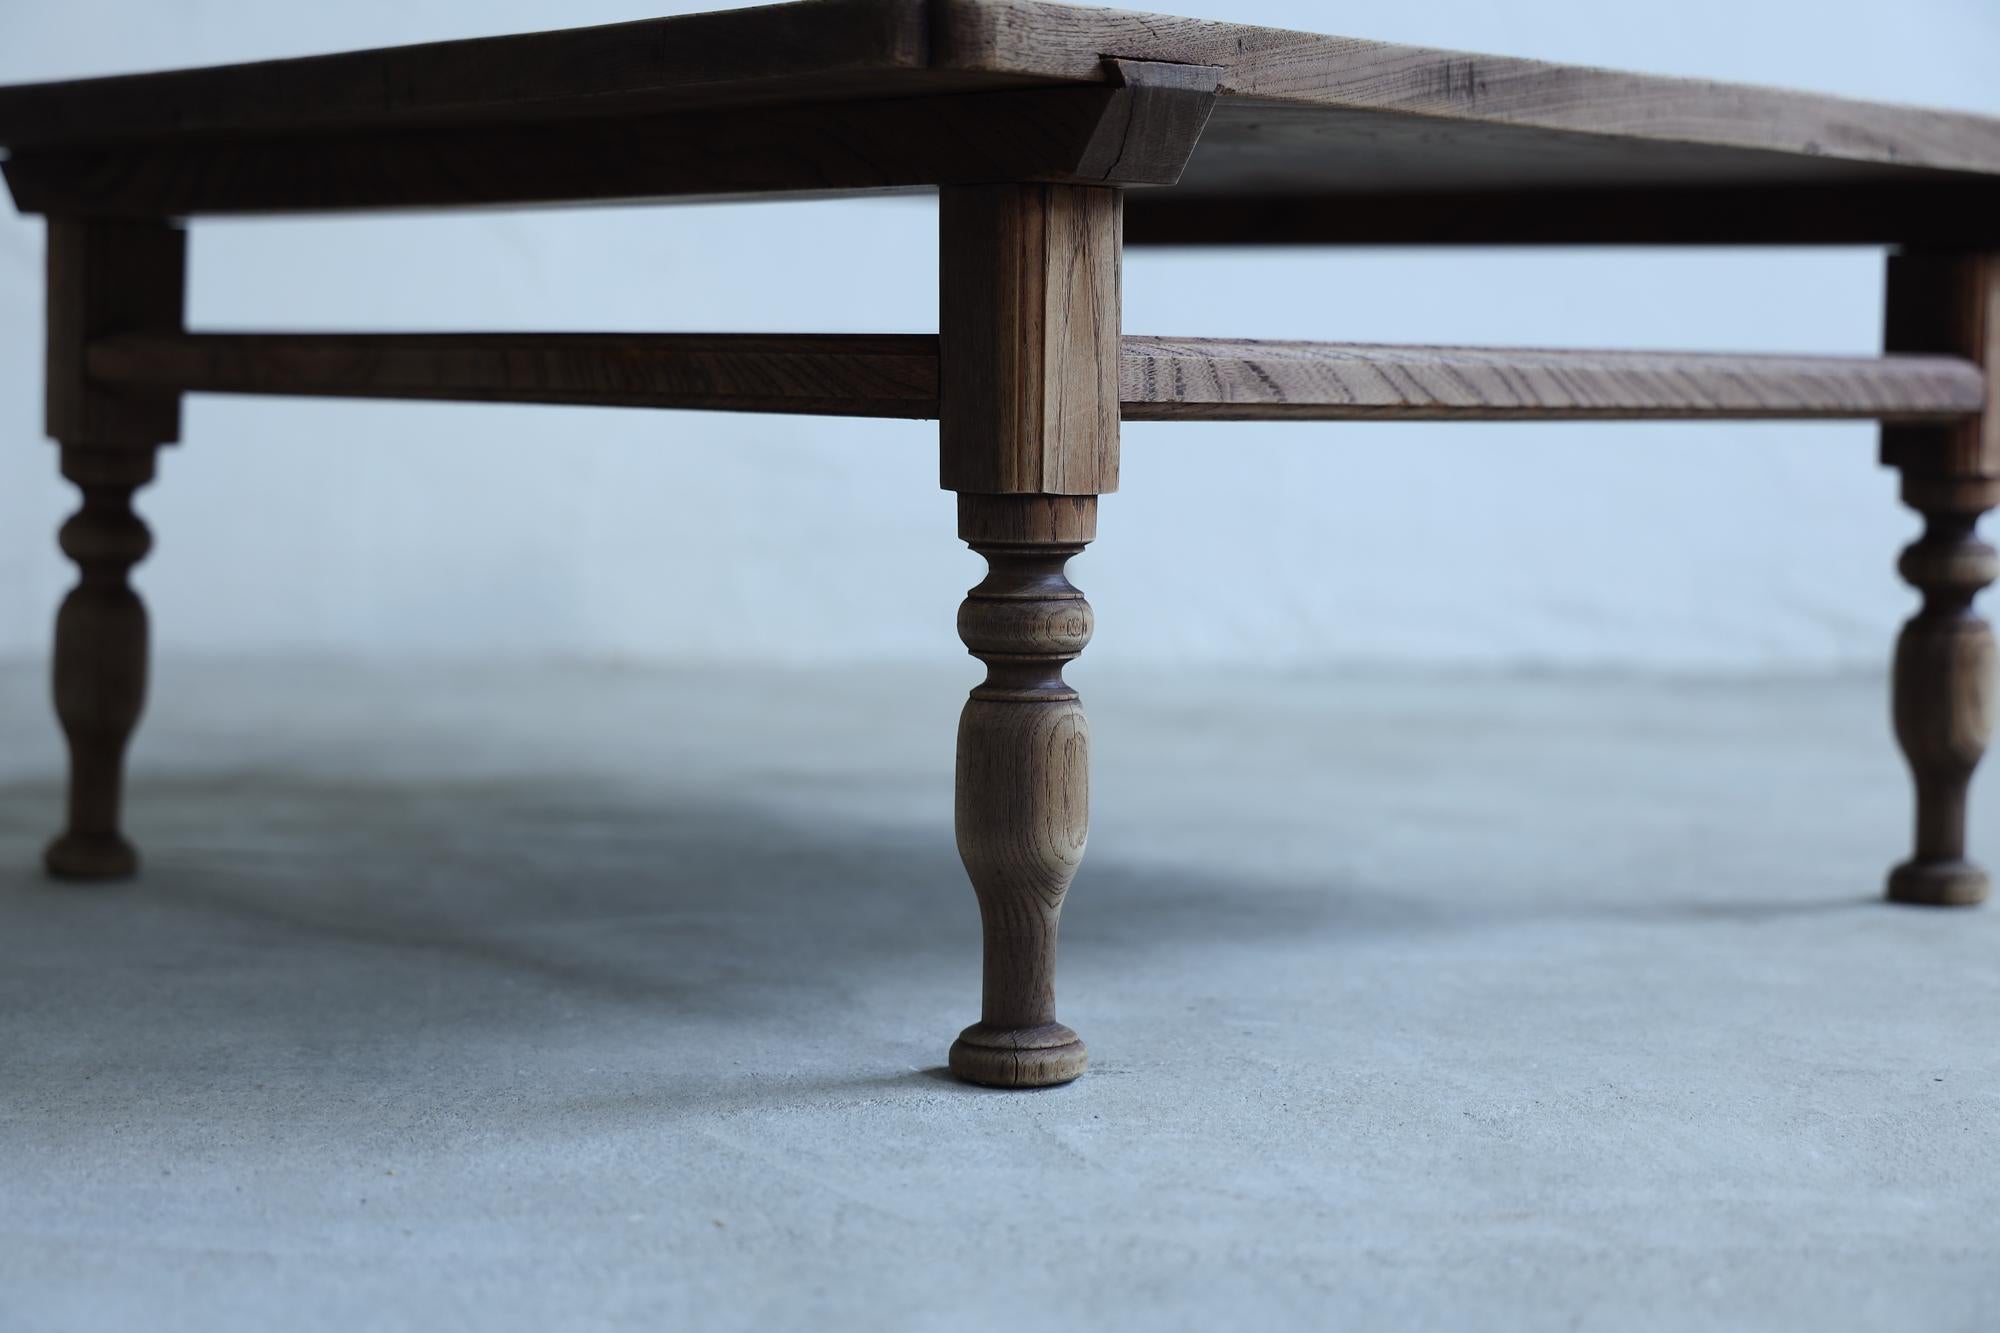 An antique Japanese coffee table produced in the Taisho era.

It is a small table, but very elaborately made.

It is made with the traditional technique used in Japanese shrines.

The material is high-quality zelkova wood. It is a precious single